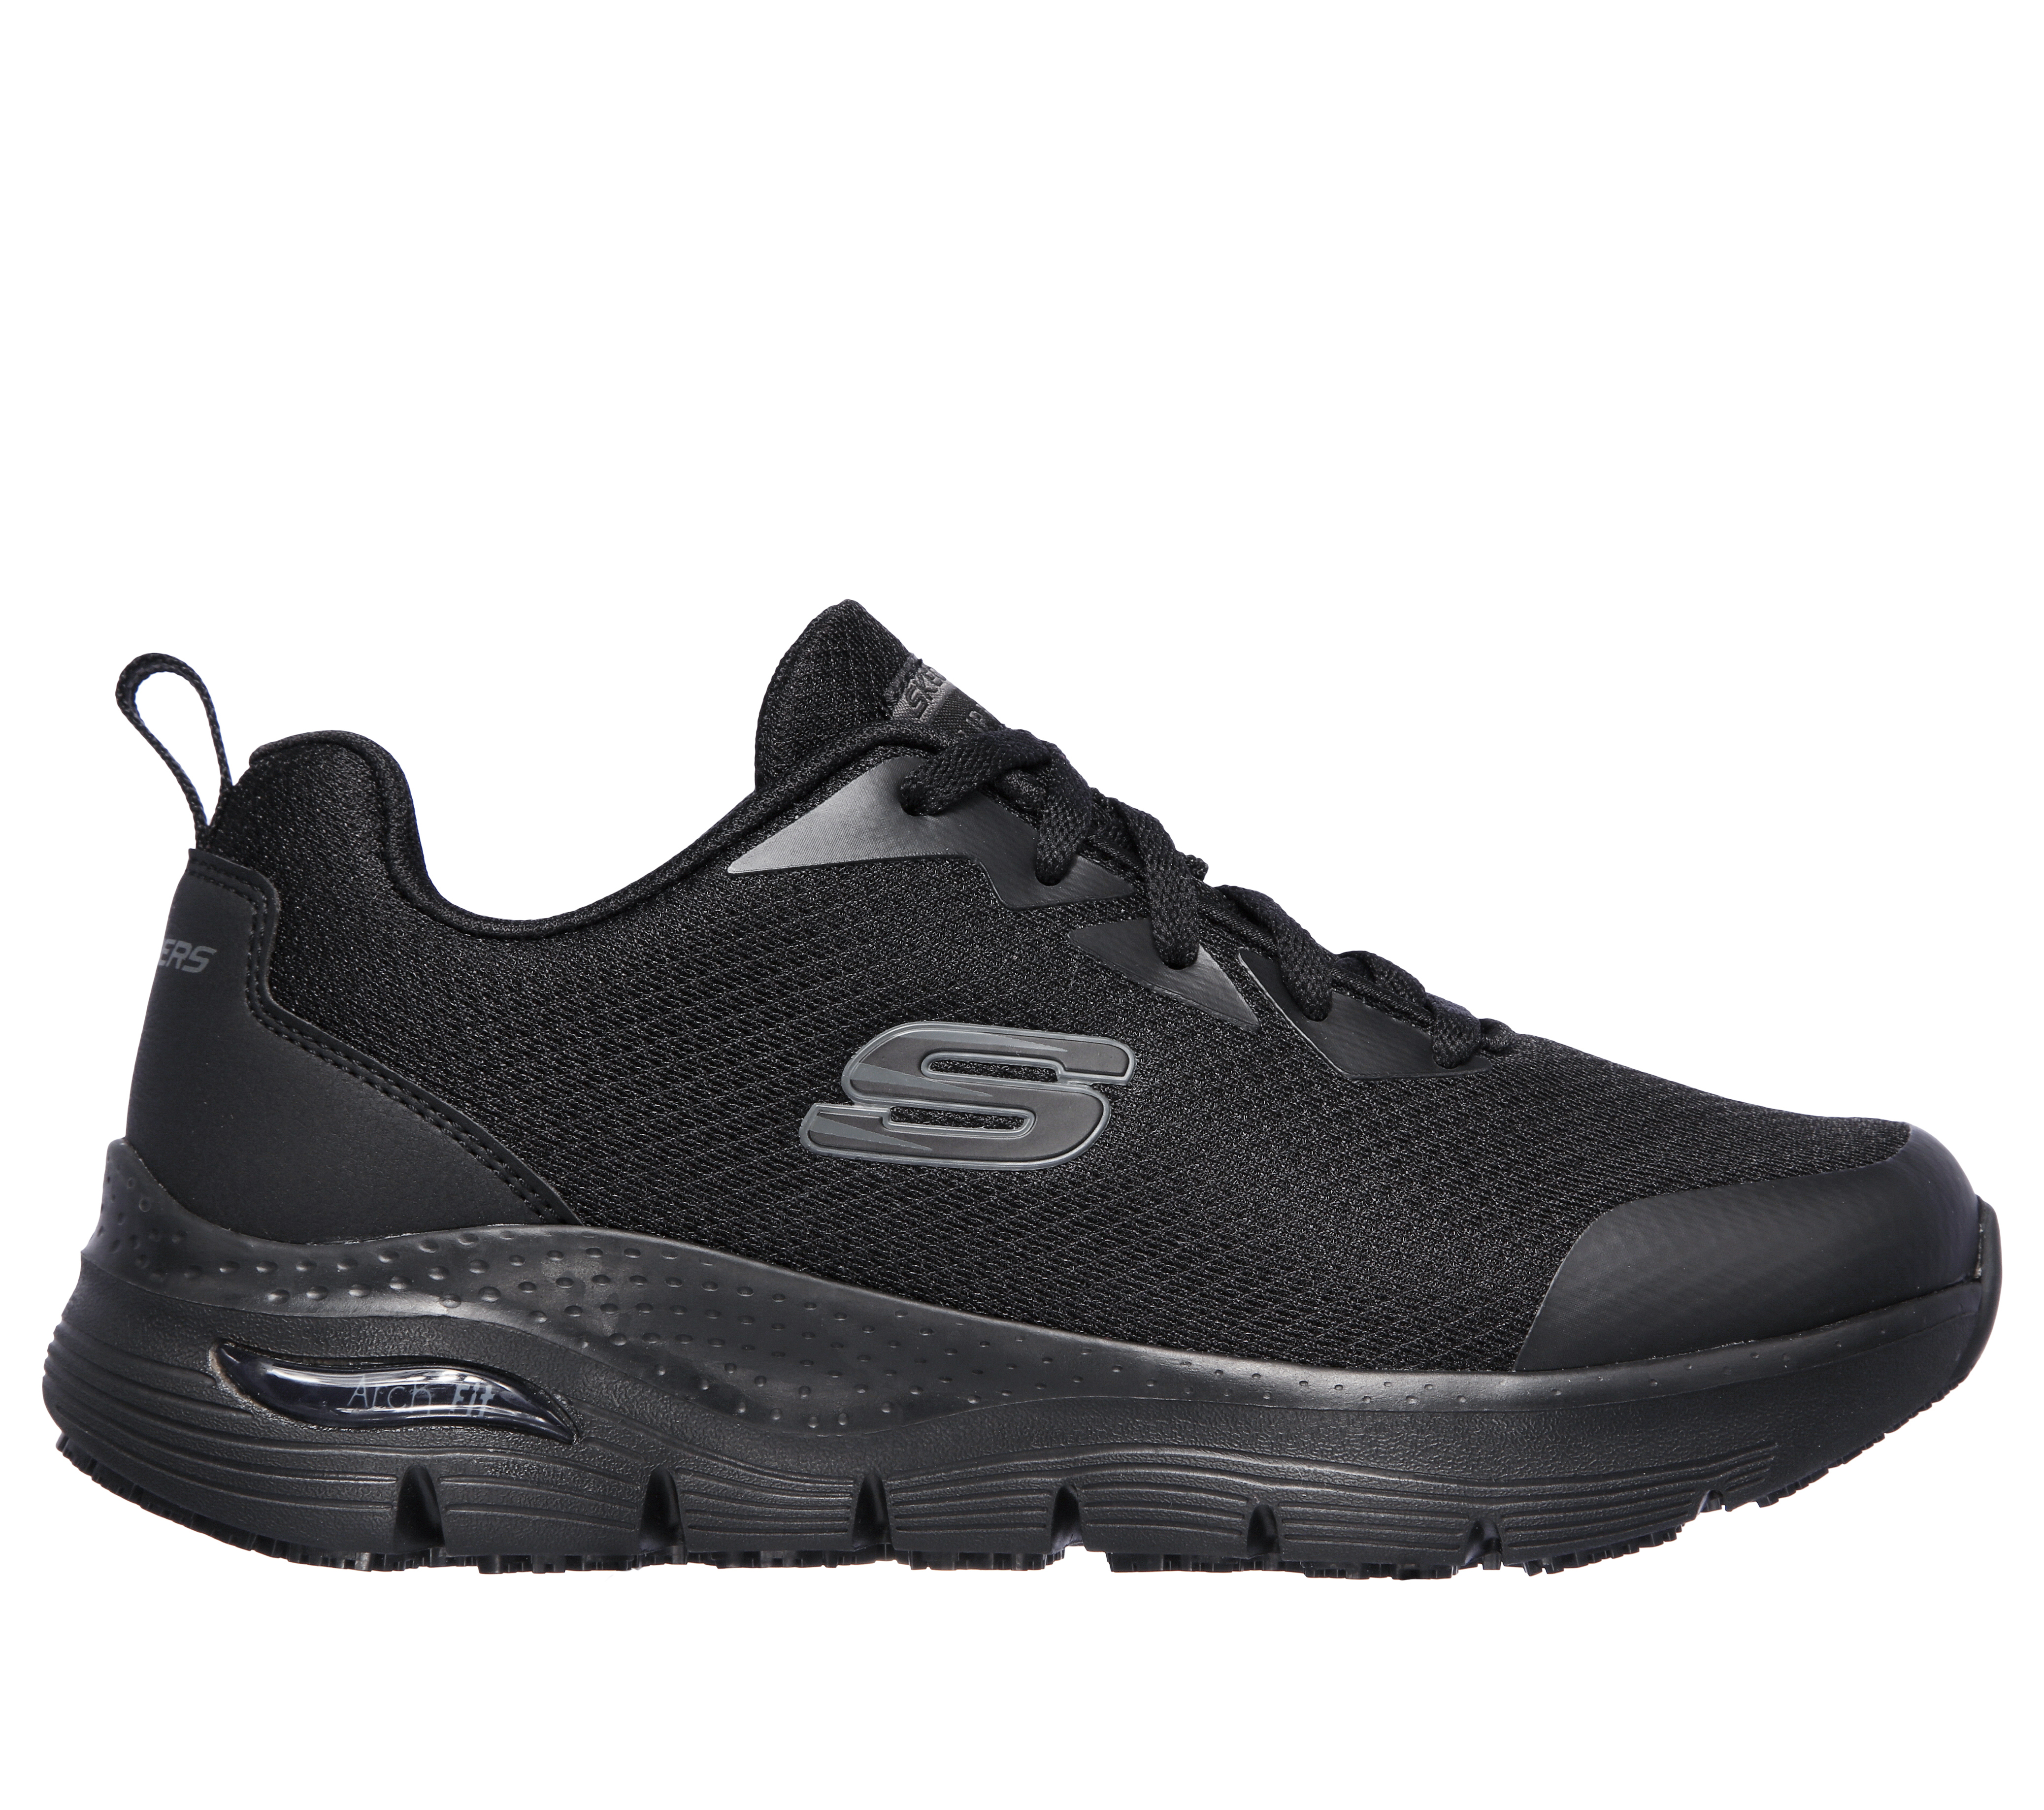 élite Mutuo Mecánico Work: Arch Fit SR | SKECHERS